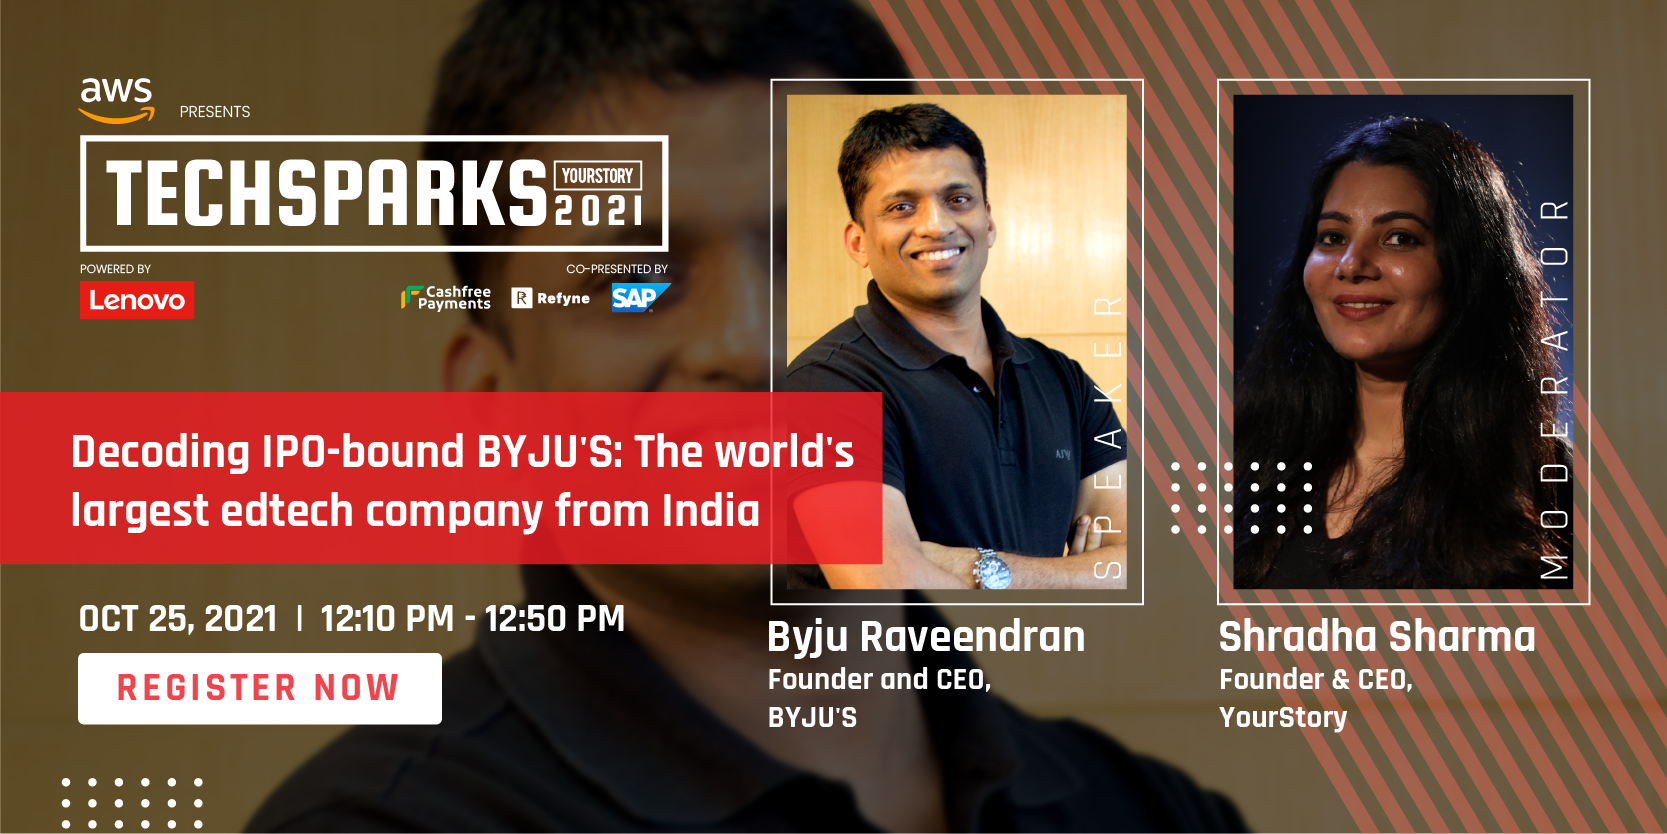 The golden age of teachers is coming back, says Byju Raveendran at TechSparks 2021
